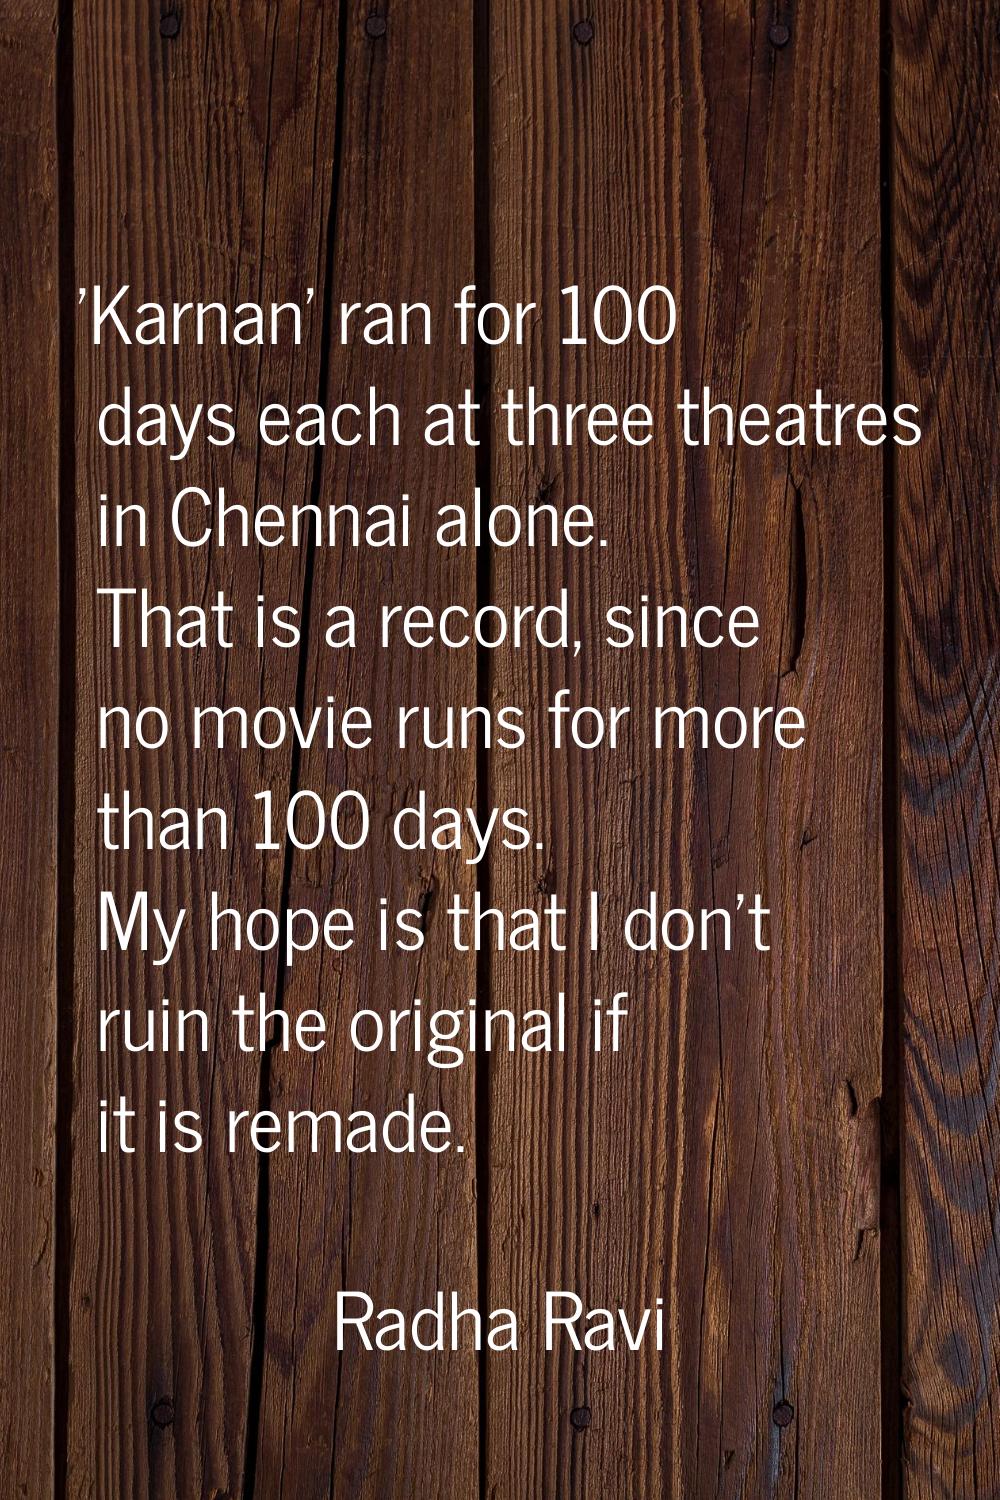 'Karnan' ran for 100 days each at three theatres in Chennai alone. That is a record, since no movie